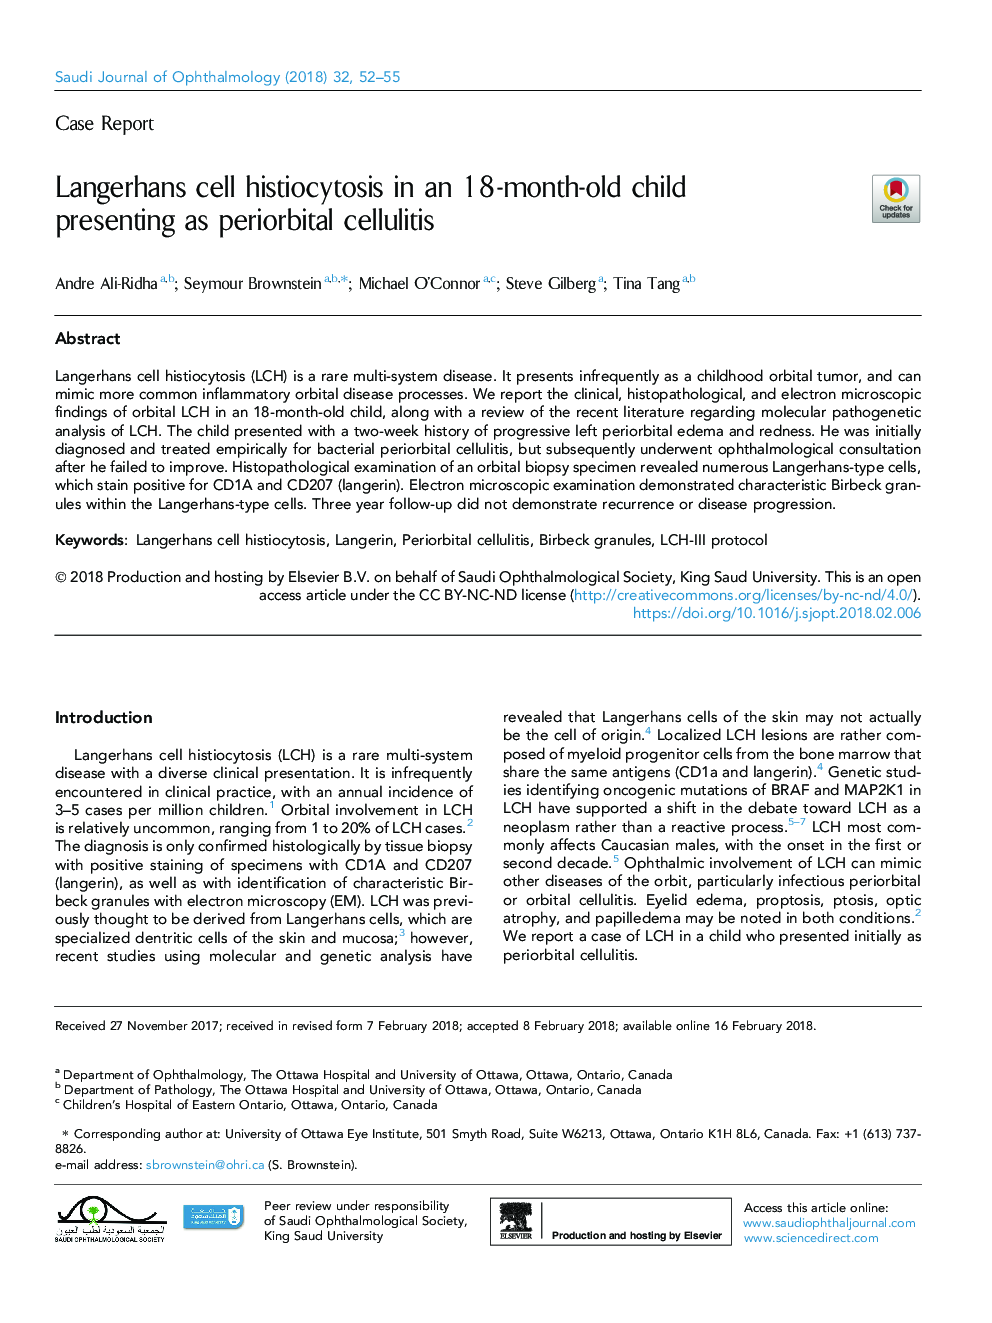 Langerhans cell histiocytosis in an 18-month-old child presenting as periorbital cellulitis